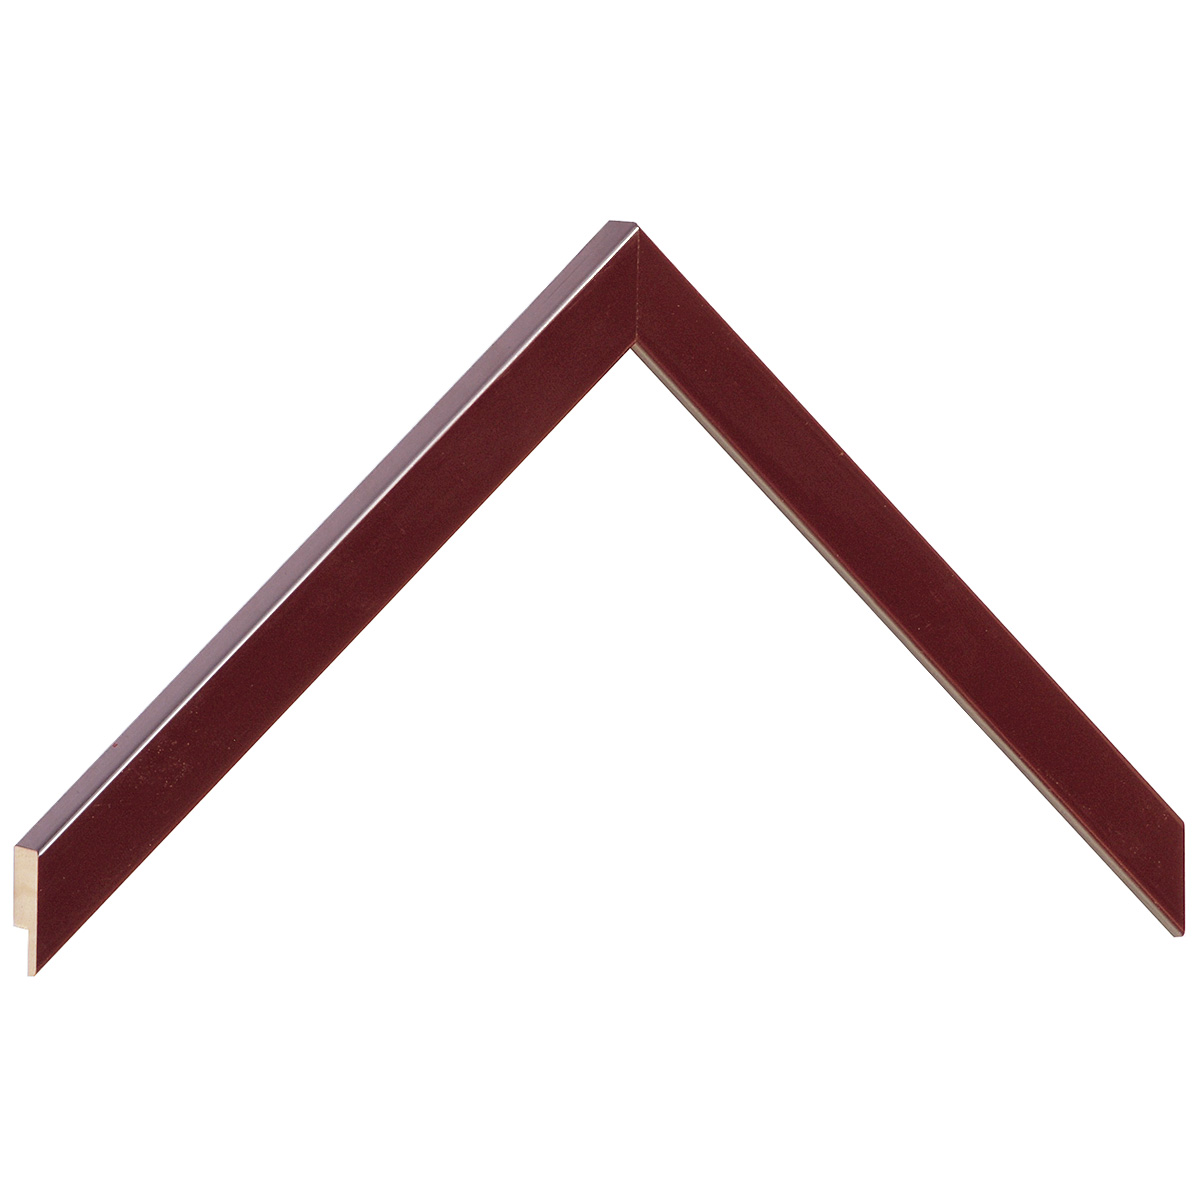 Moulding ayous - width 15mm height 14 - Glossy burgundy - Sample